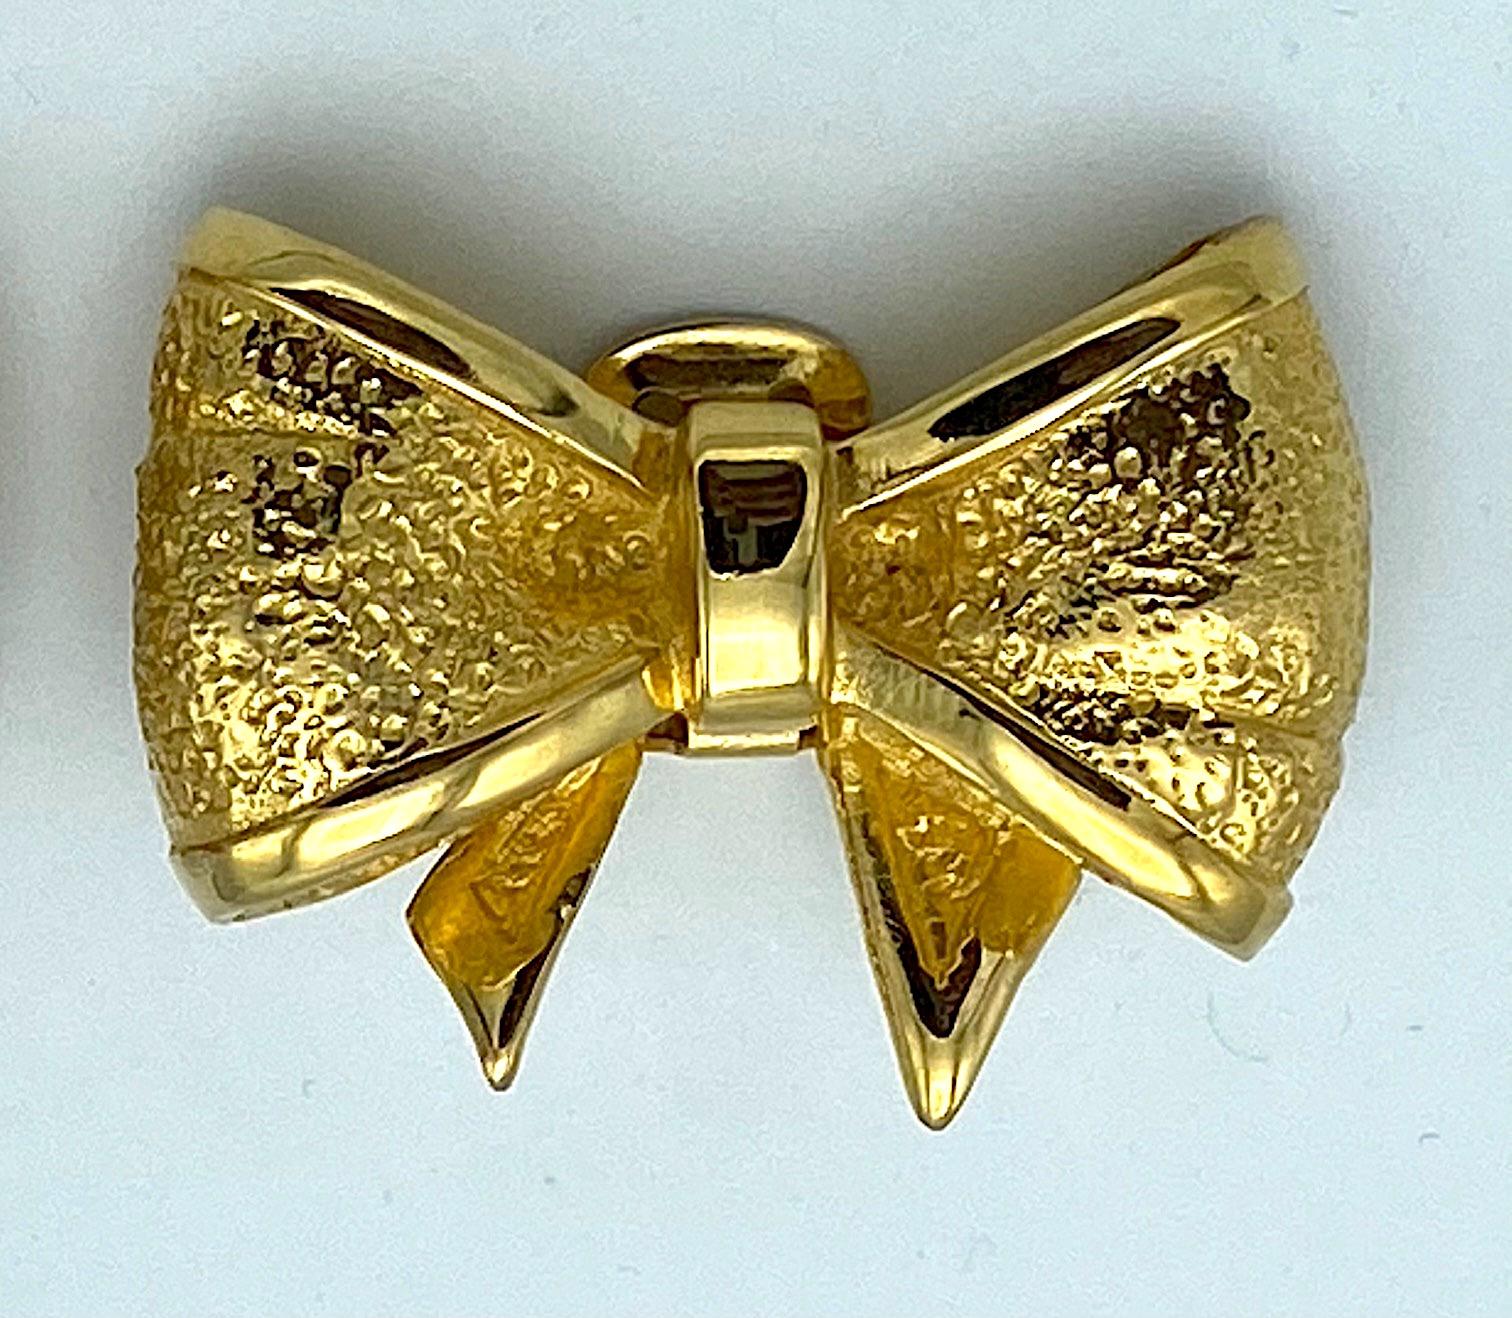 Lovely pair of 1980s Valentino bow earrings. The ribbon bow design is cast in a textured finish with a smooth border. Each gold plated clip back earring measures 1.75 inches wide, 1.13 inches high and .38 of an inch deep. Each has the oblong